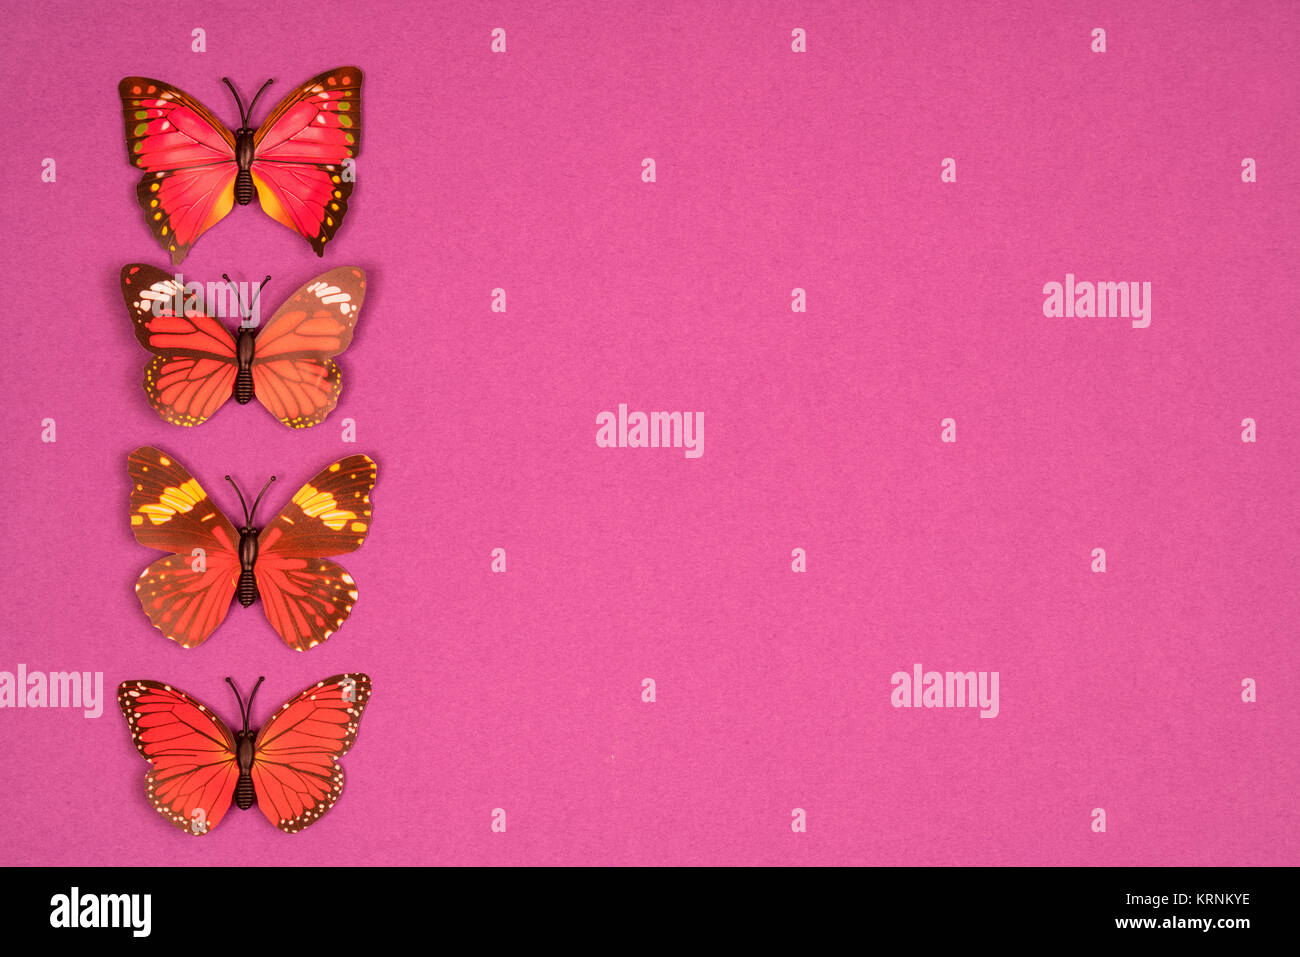 decorative butterflies on a colored background Stock Photo - Alamy